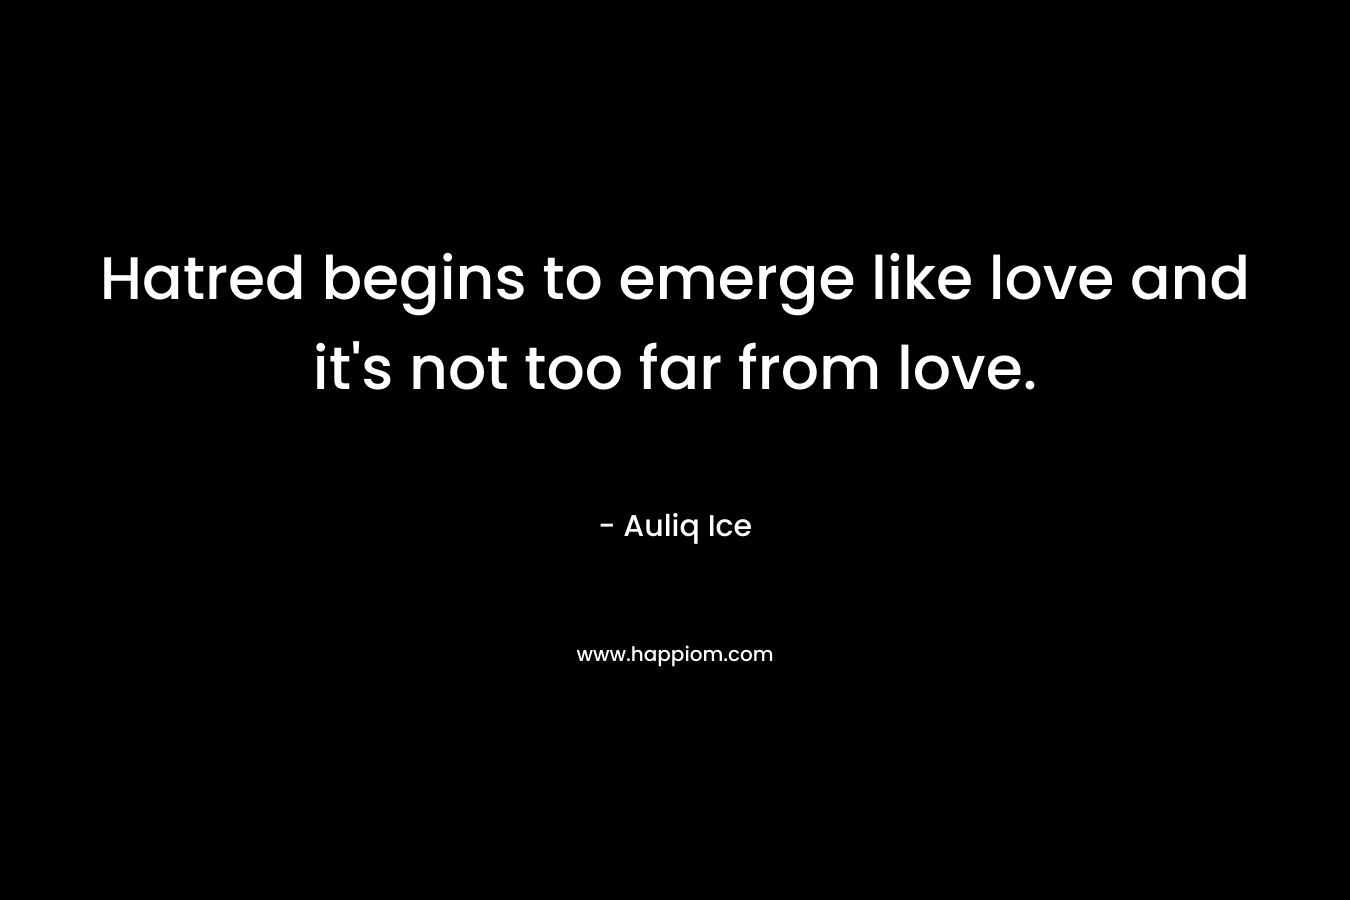 Hatred begins to emerge like love and it’s not too far from love. – Auliq Ice